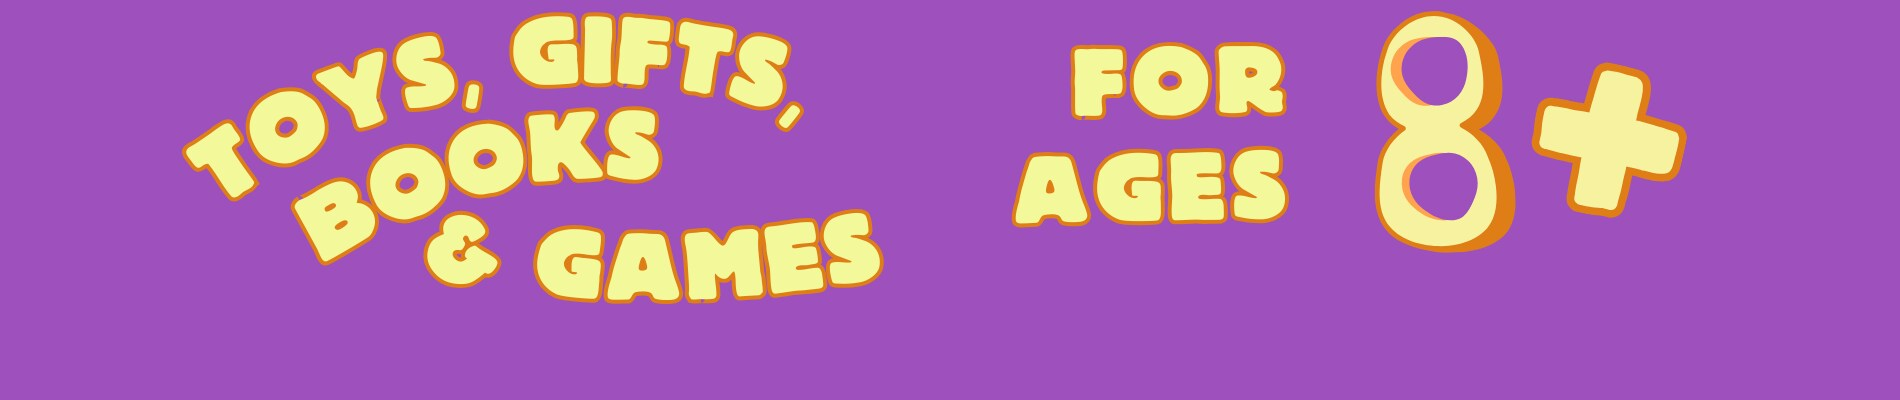 Purple background with text that reads: 'Toys, Gifts & Games for ages 8+"